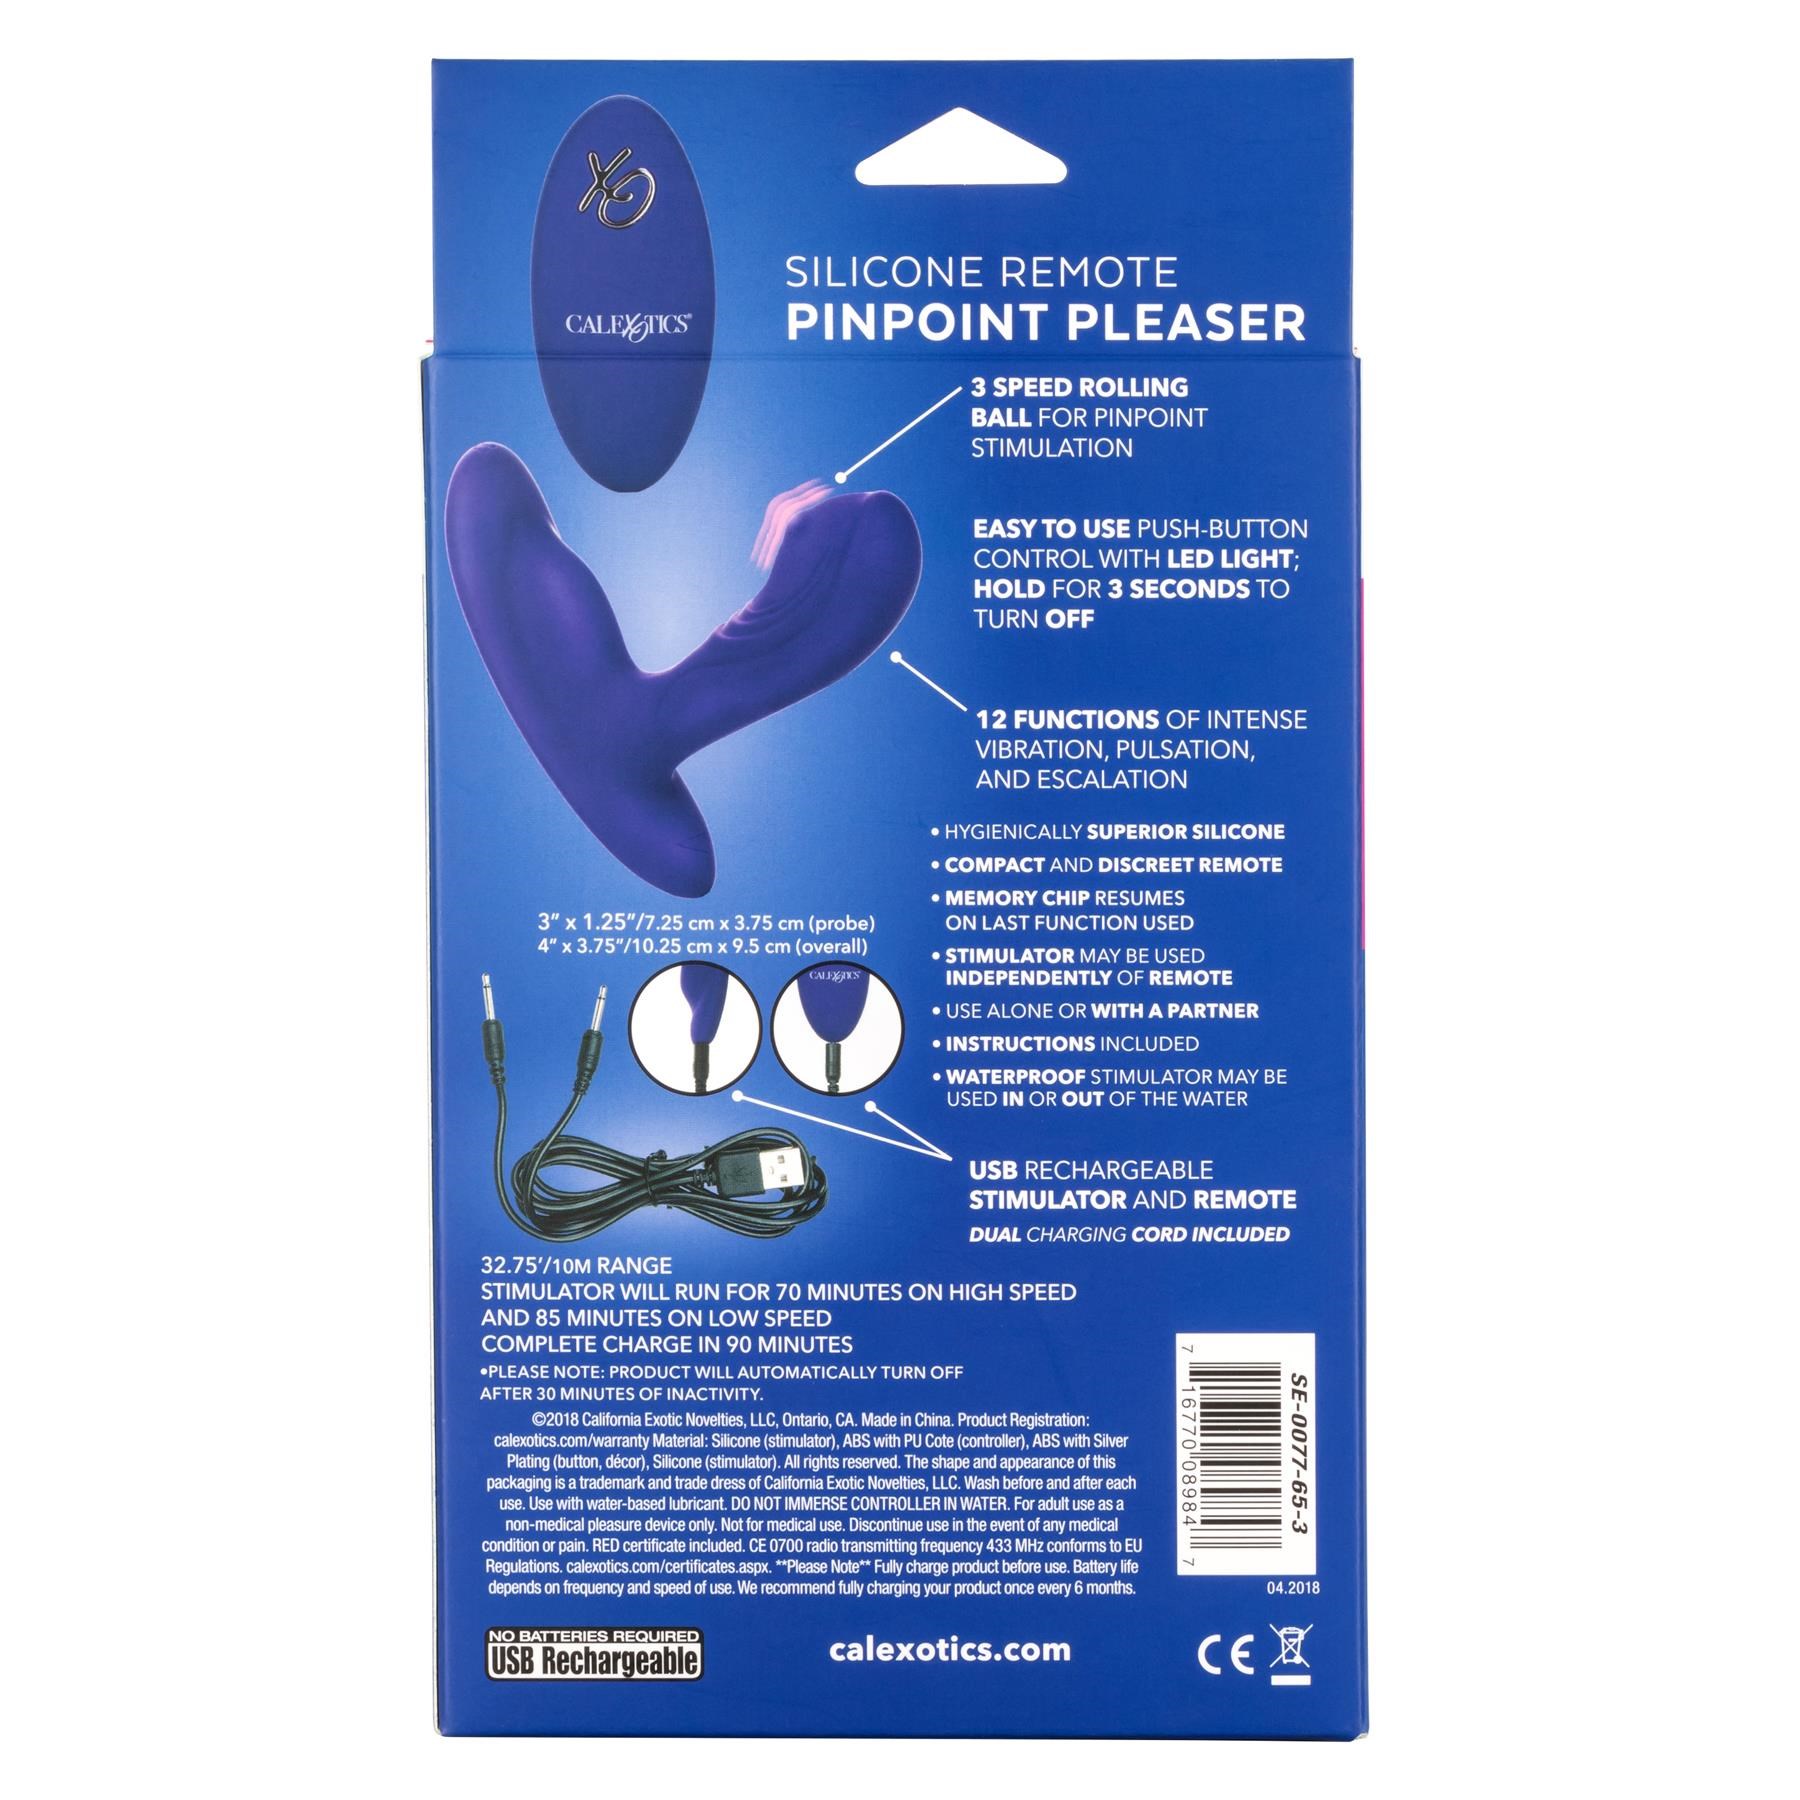 Silicone Remote Pinpoint Pleaser - Packaging - Back